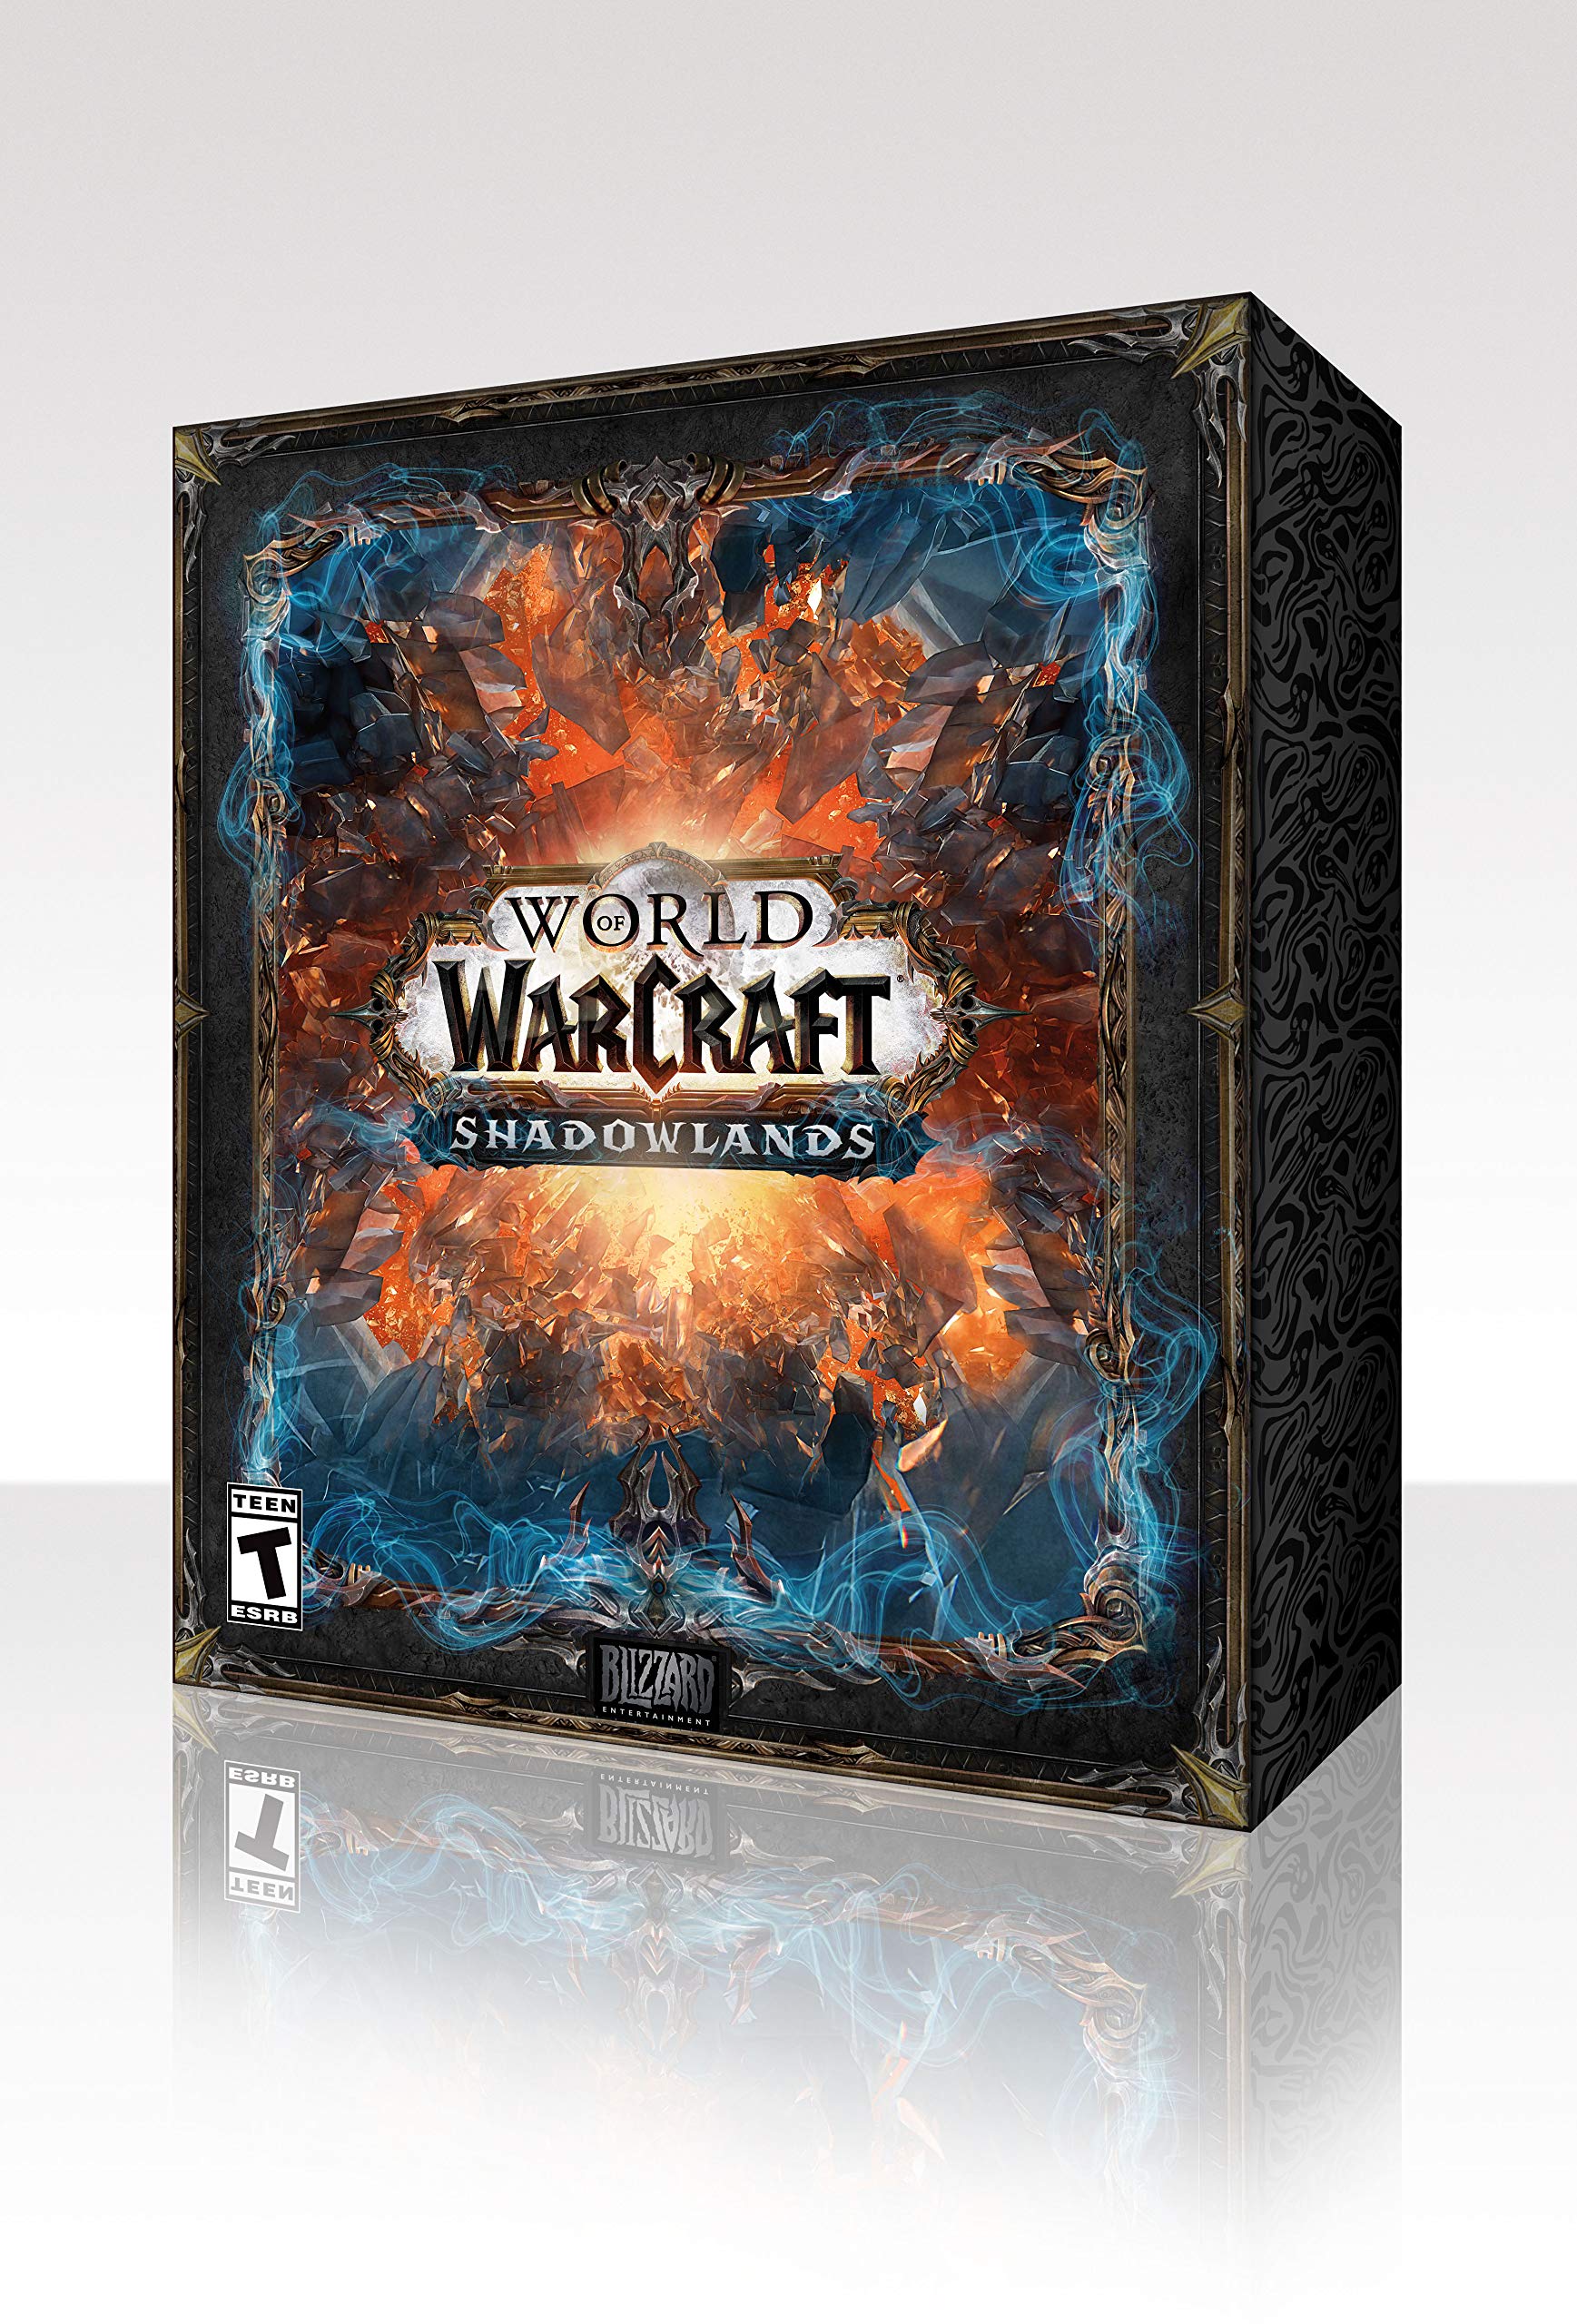 World of Warcraft: Shadowlands Collector's Edition - PC Collector's Edition